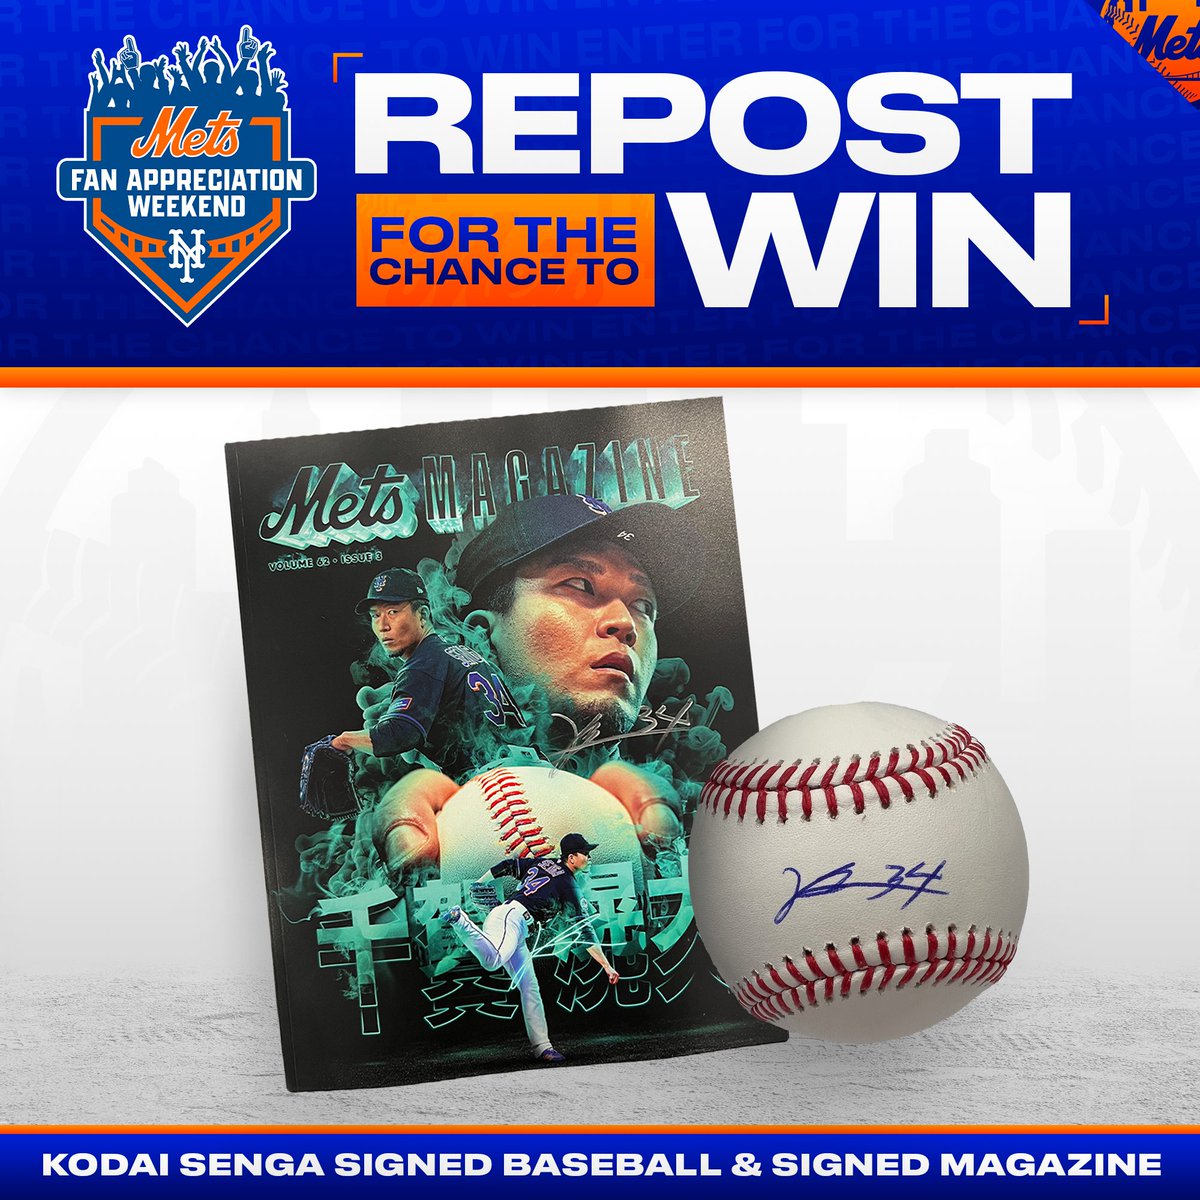 👻 ENTER FOR YOUR CHANCE TO WIN ⚾️ Repost this for your chance to win an autographed @KodaiSenga baseball and autographed #Mets magazine! Rules: bit.ly/3ZAuD2s